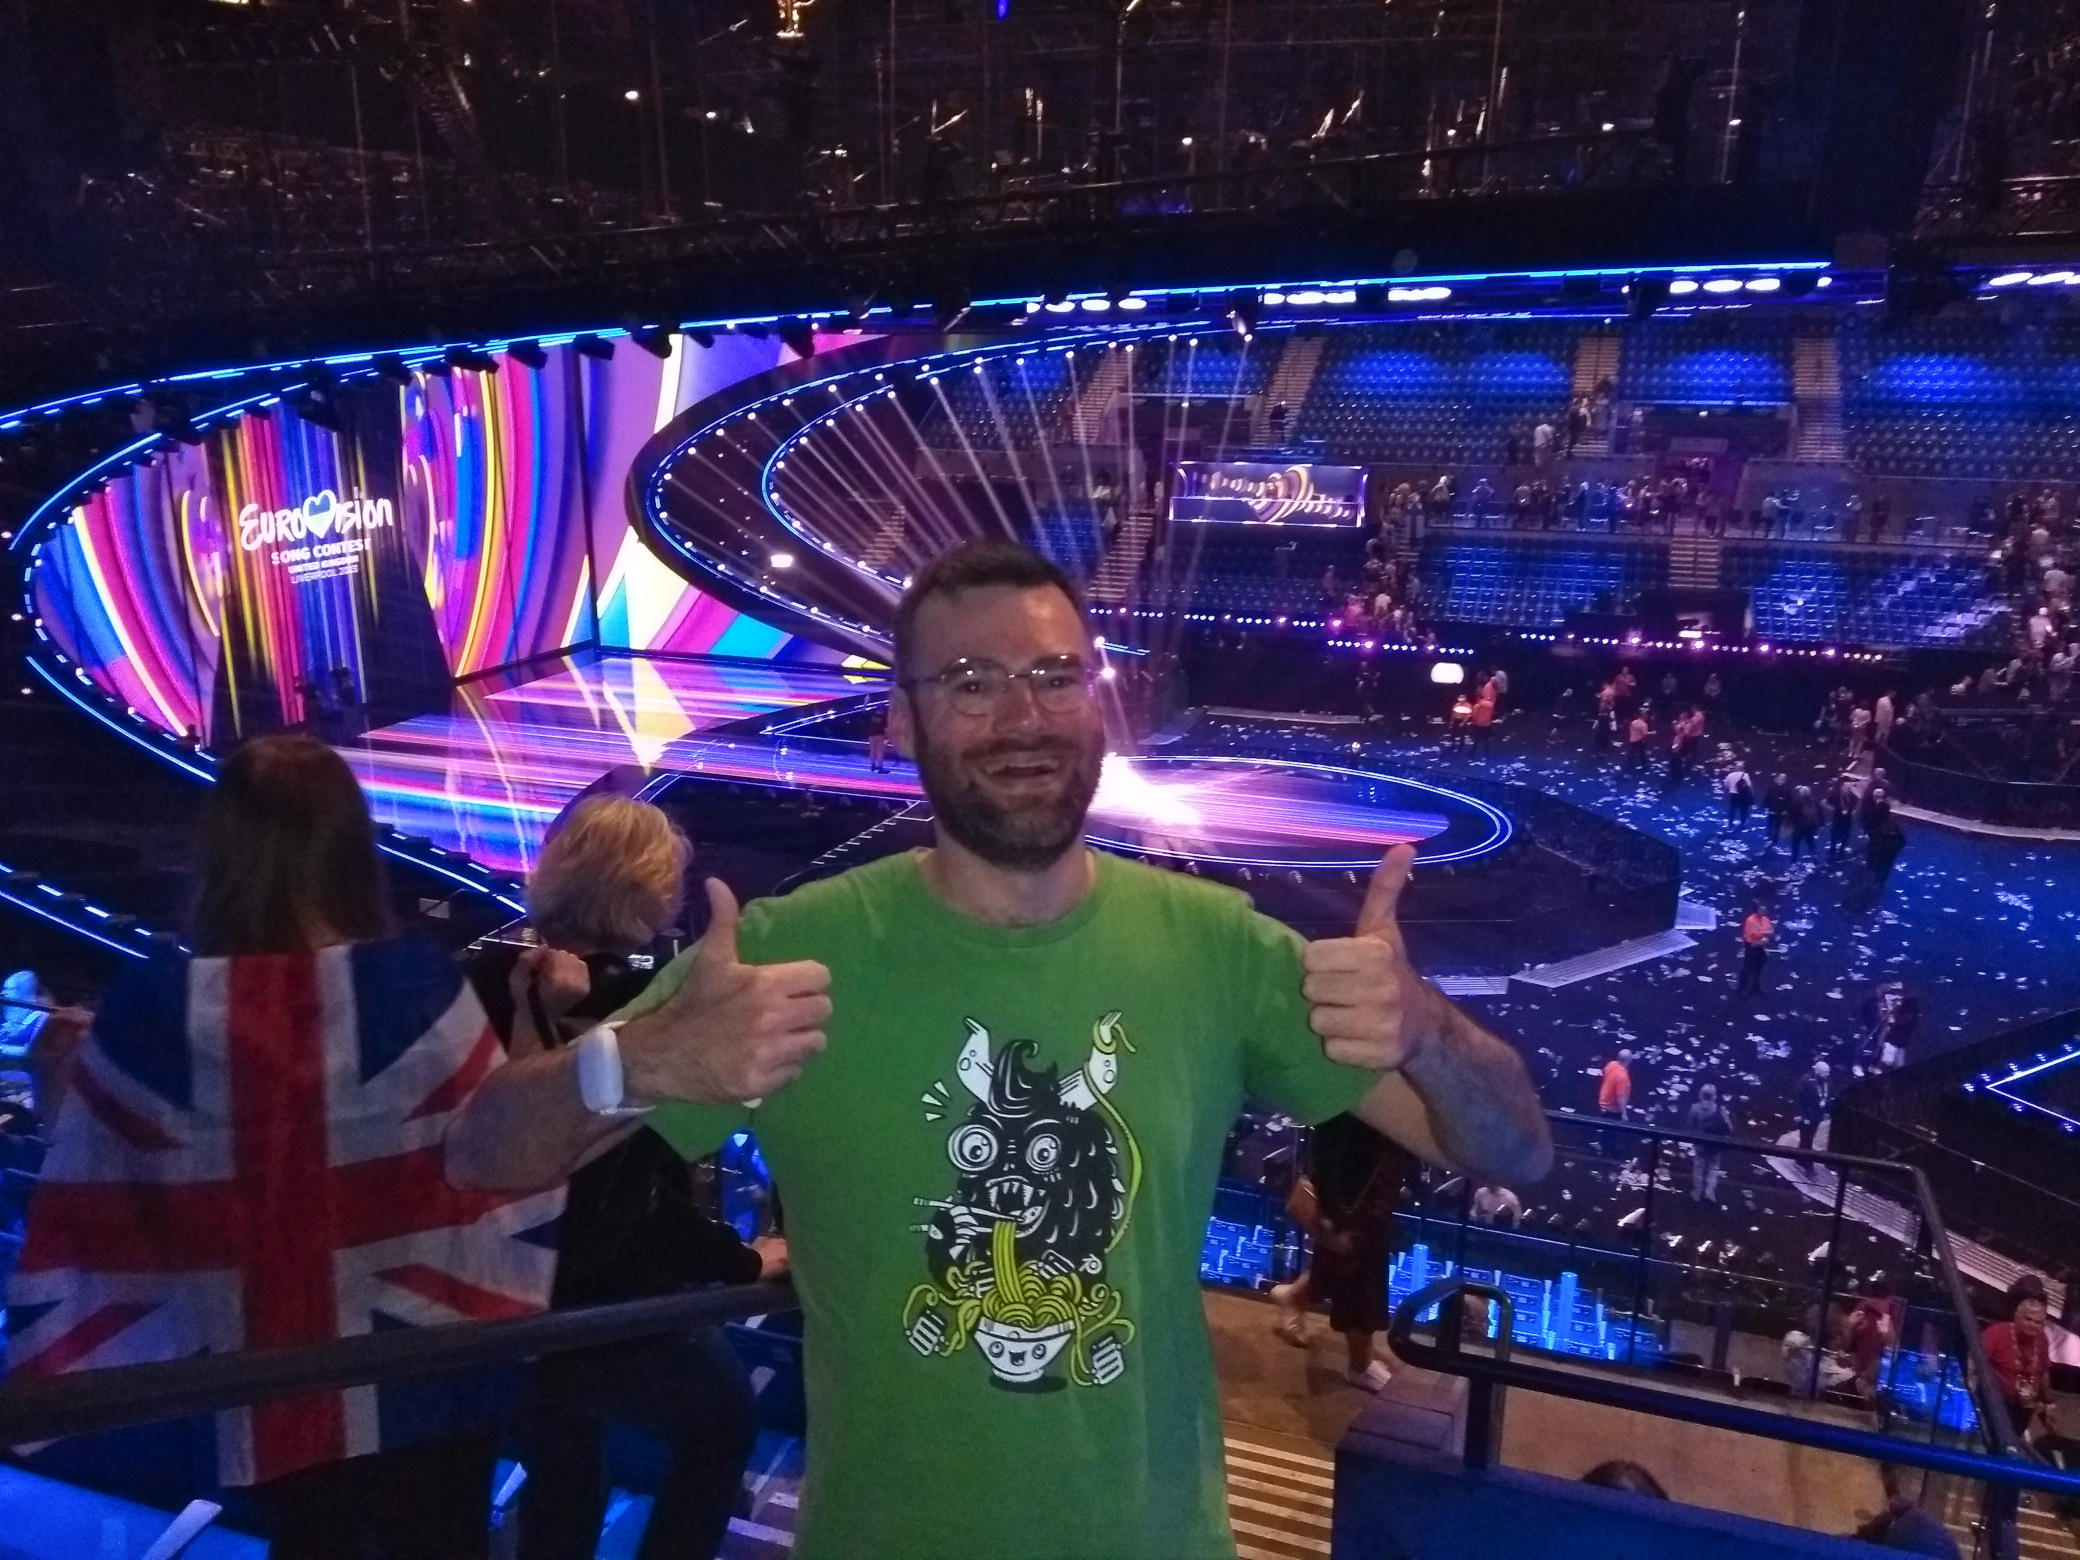 The United Kingdom: 24 points. Le Royaume-Uni: 24 points &hellip; The result did not dampen Andrew&rsquo;s joy of being live at the ESC Grand Final